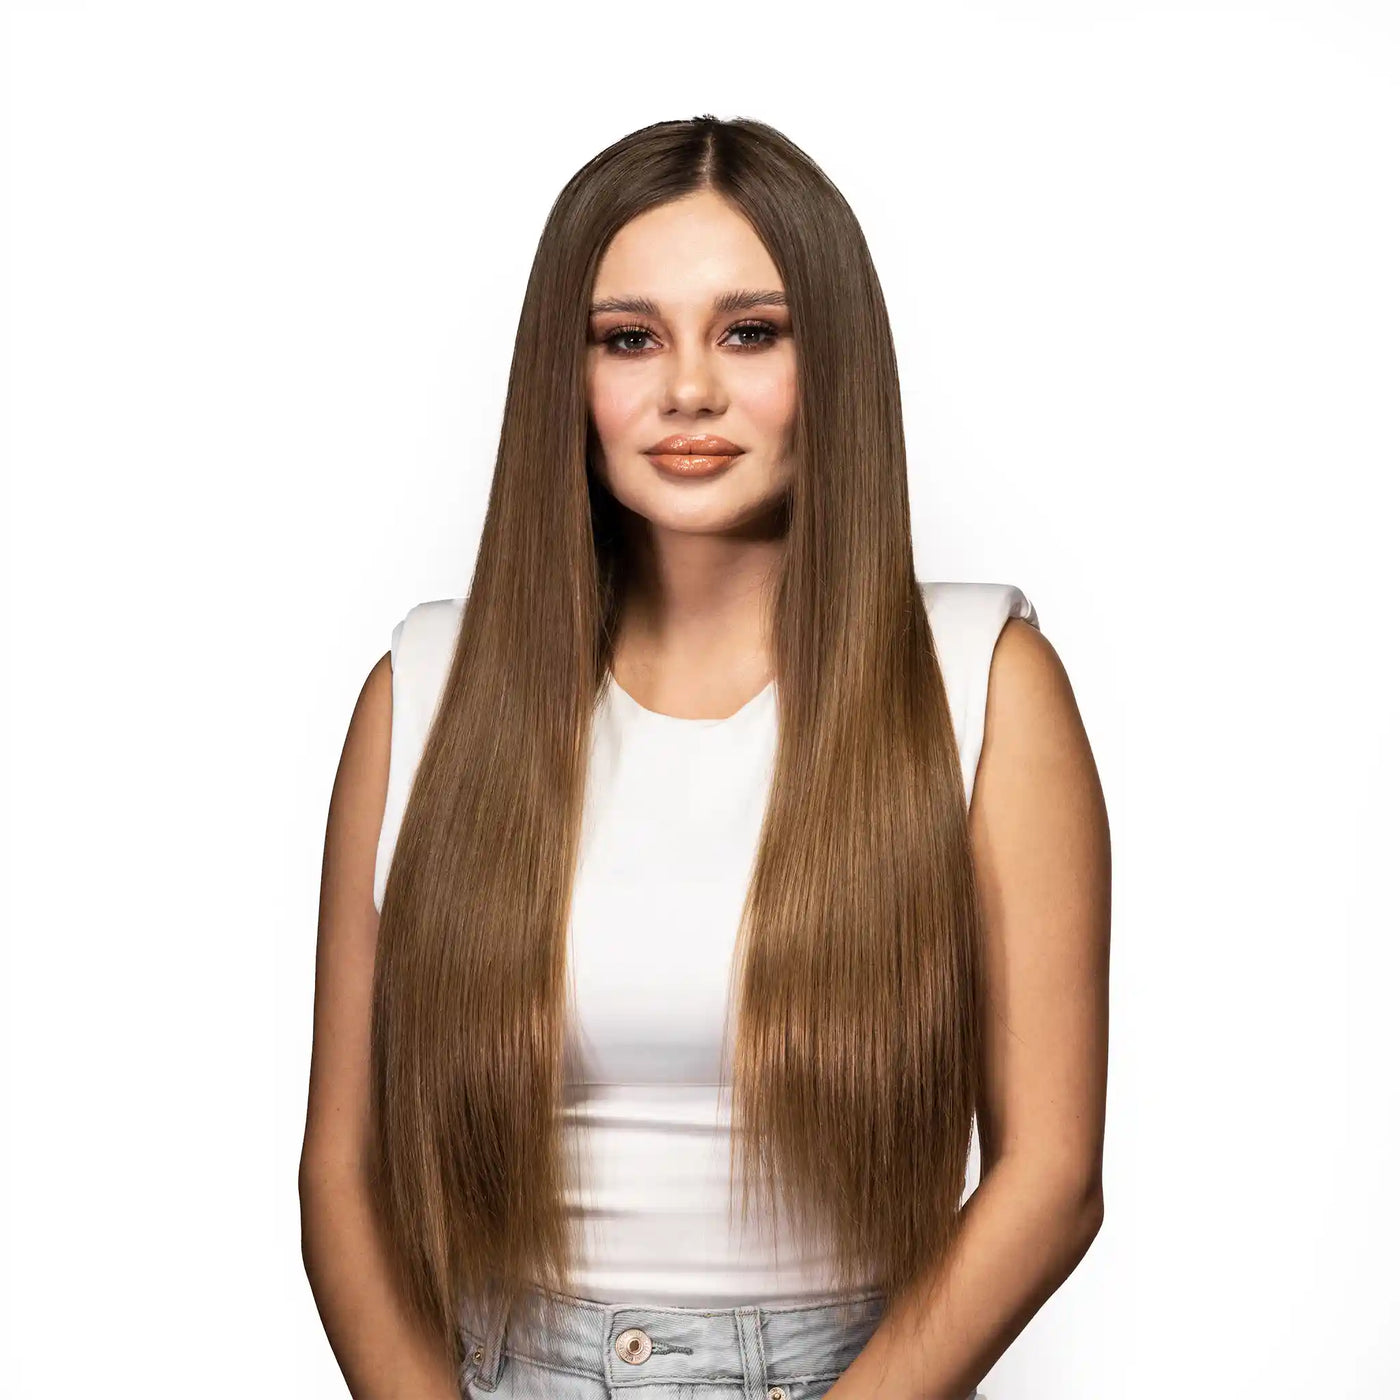 Golden Offer - Clip in Hair Extensions (9 Pieces) 24 inch